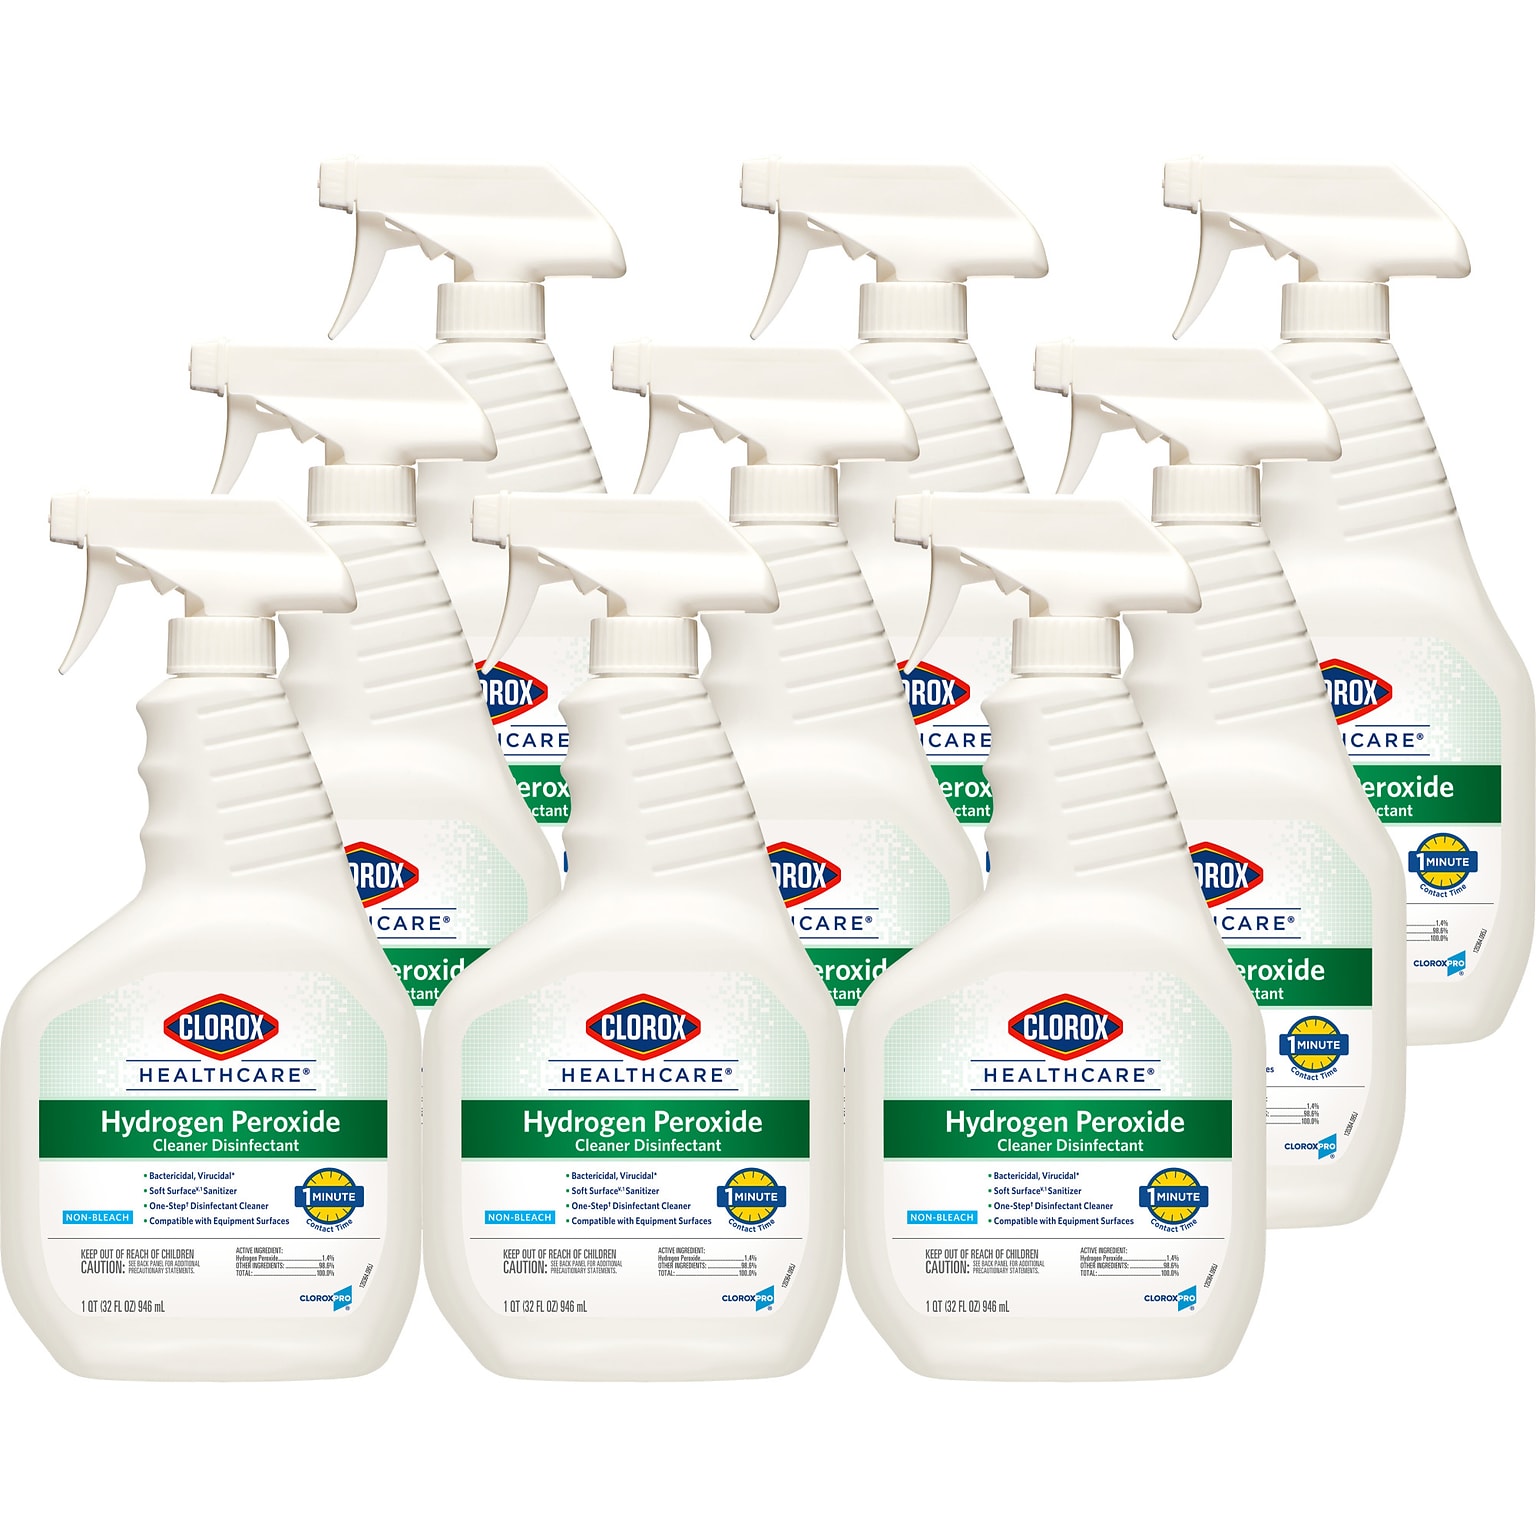 Clorox Healthcare Hydrogen Peroxide Cleaner Disinfectant, Spray, 32 oz, 9 Bottles/CT (30828)